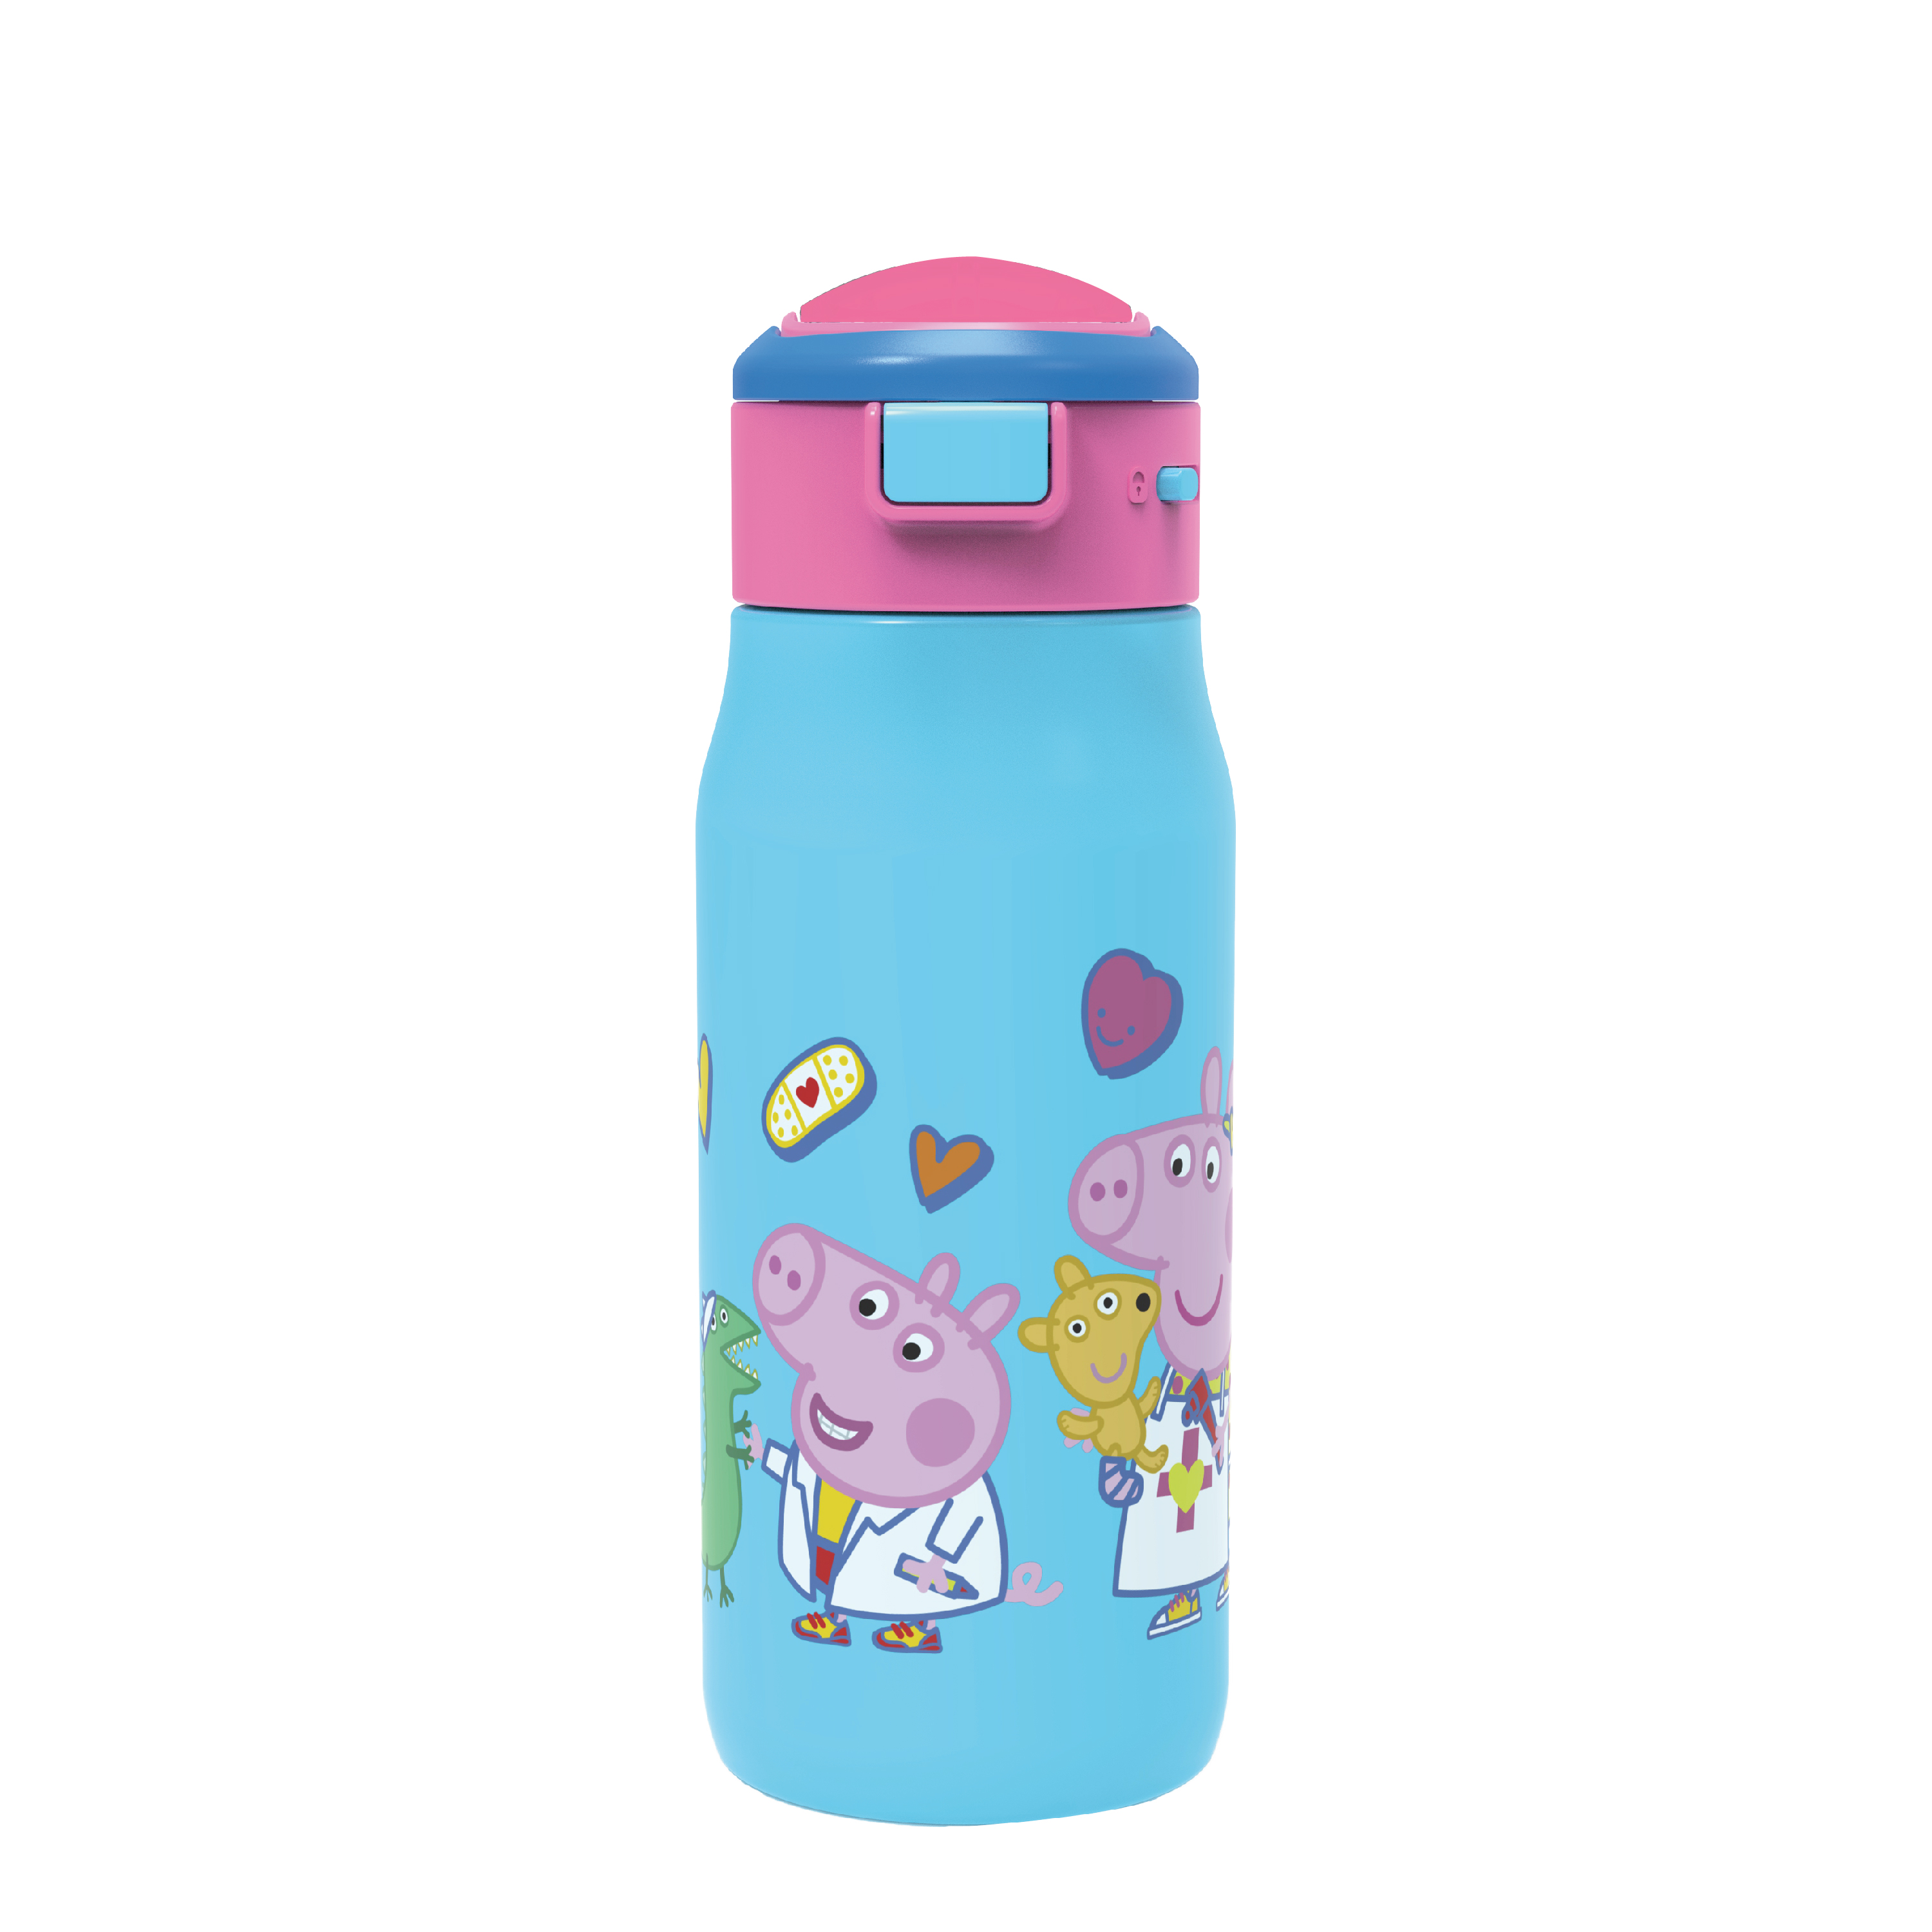 Peppa Pig 13.5 ounce Mesa Double Wall Insulated Stainless Steel Water Bottle, Peppa and Friends slideshow image 1